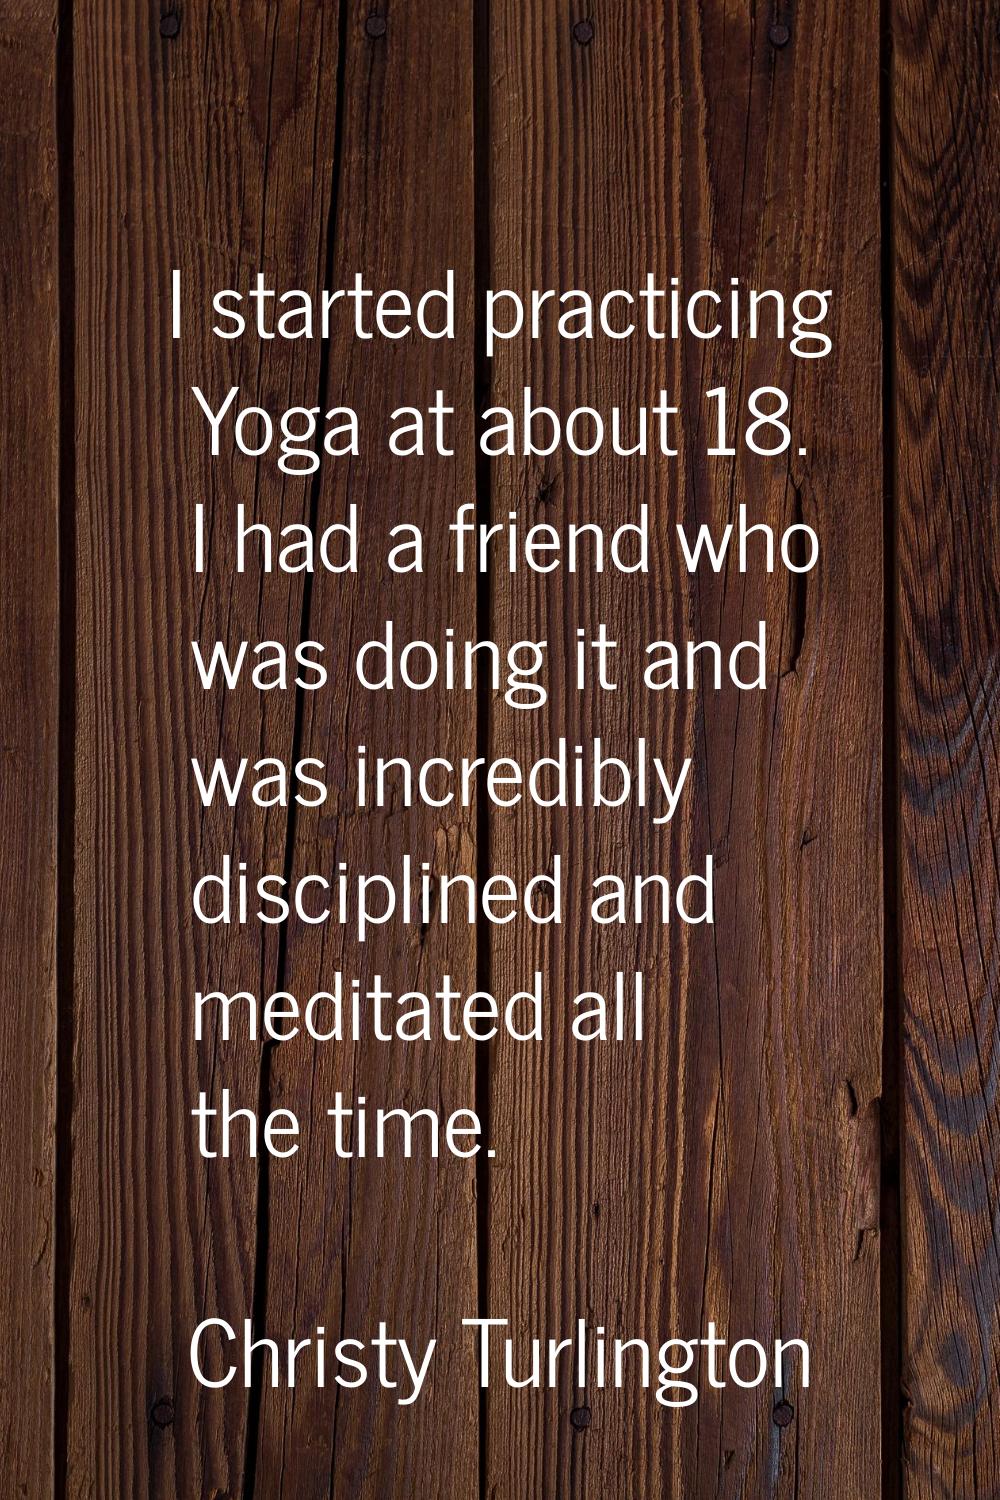 I started practicing Yoga at about 18. I had a friend who was doing it and was incredibly disciplin